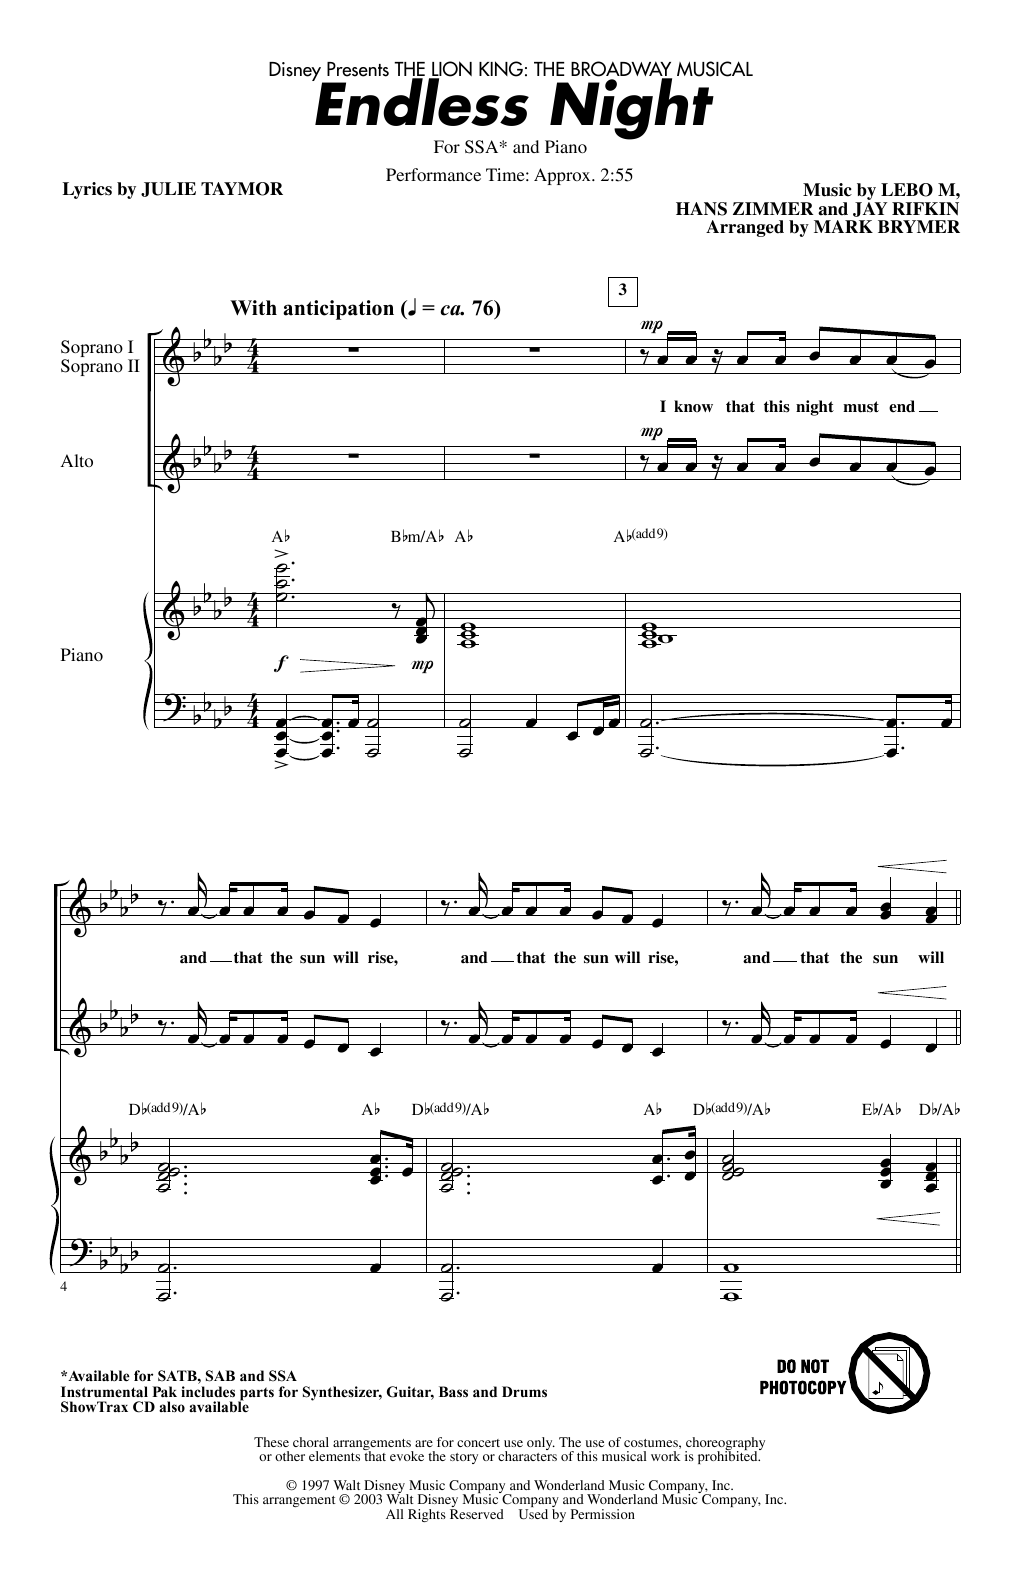 Lebo M., Hans Zimmer, Jay Rifkin and Julie Taymor Endless Night (from The Lion King: Broadway Musical) (arr. Mark Brymer) sheet music notes and chords arranged for SAB Choir